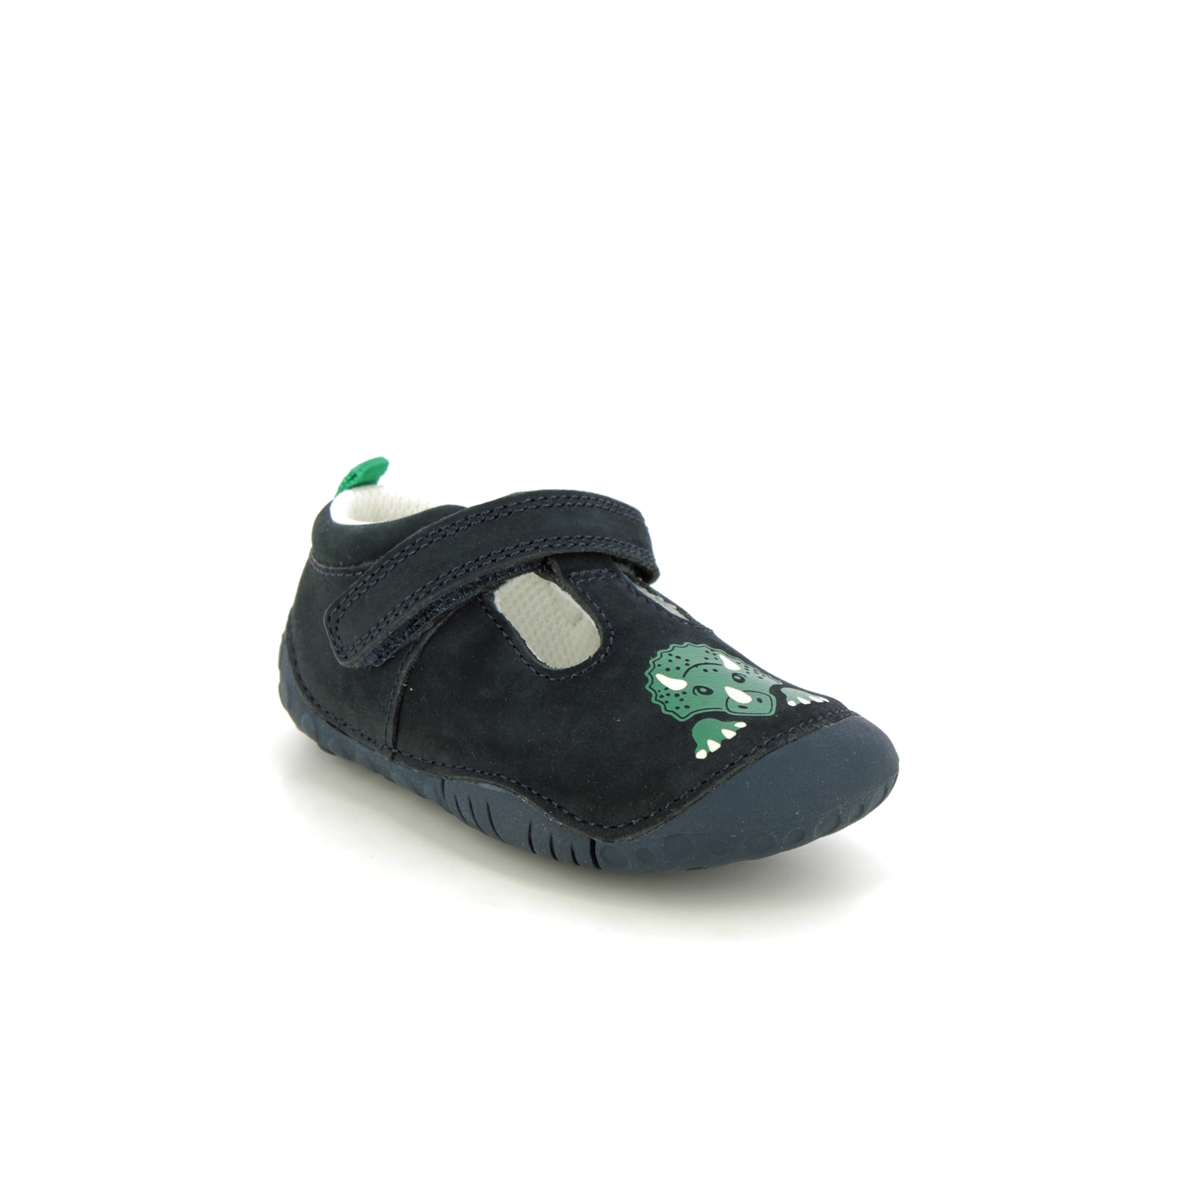 Start Rite Stomper T Bar Navy Nubuck Kids Boys First Shoes 0785-98H in a Plain Leather in Size 3.5